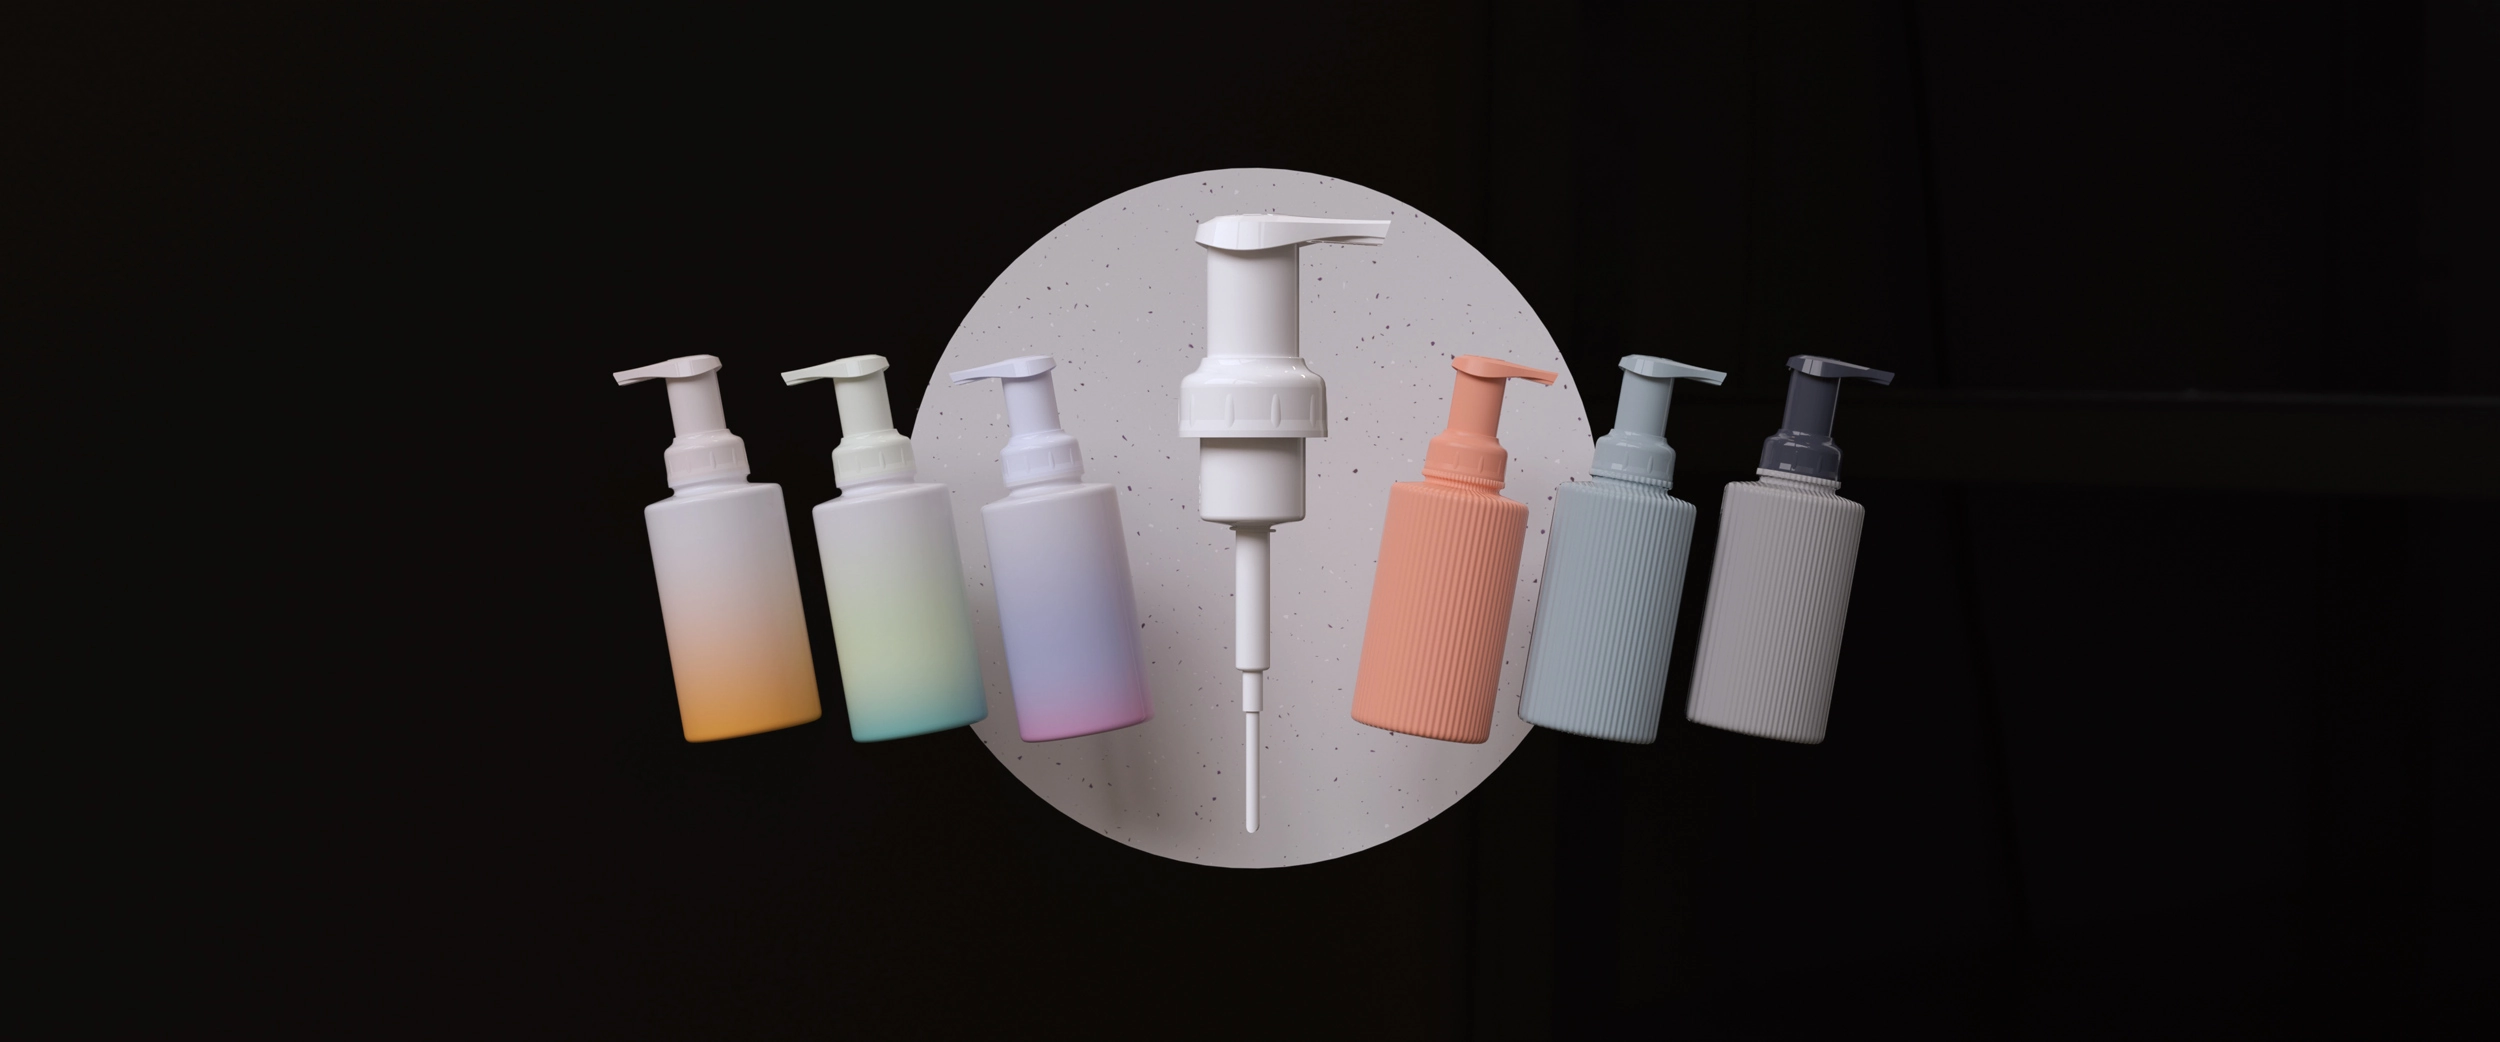 Bottles with Cloud Bottle pumps in different colors